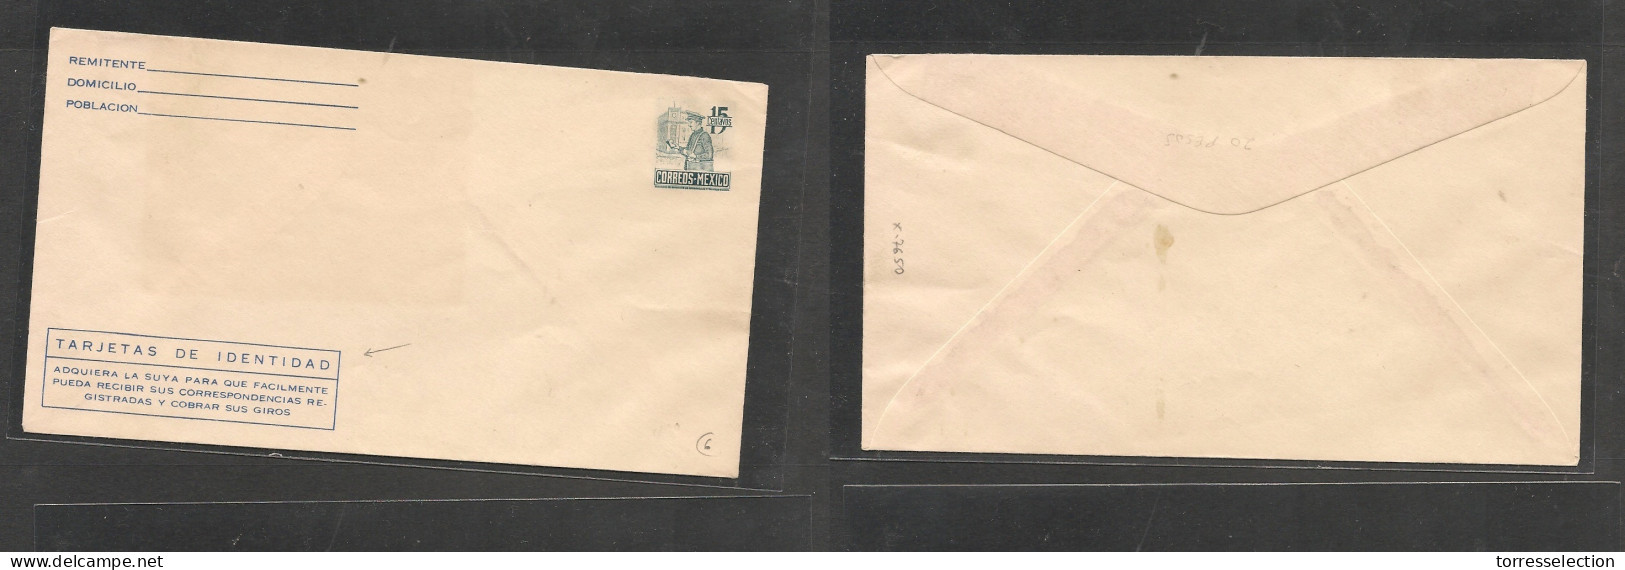 MEXICO. Mexico Cover - C,1940s Stat Env 15c Postman With Identidad Adv Cachet Rinted, Mint, Fine XSALE. - Mexico